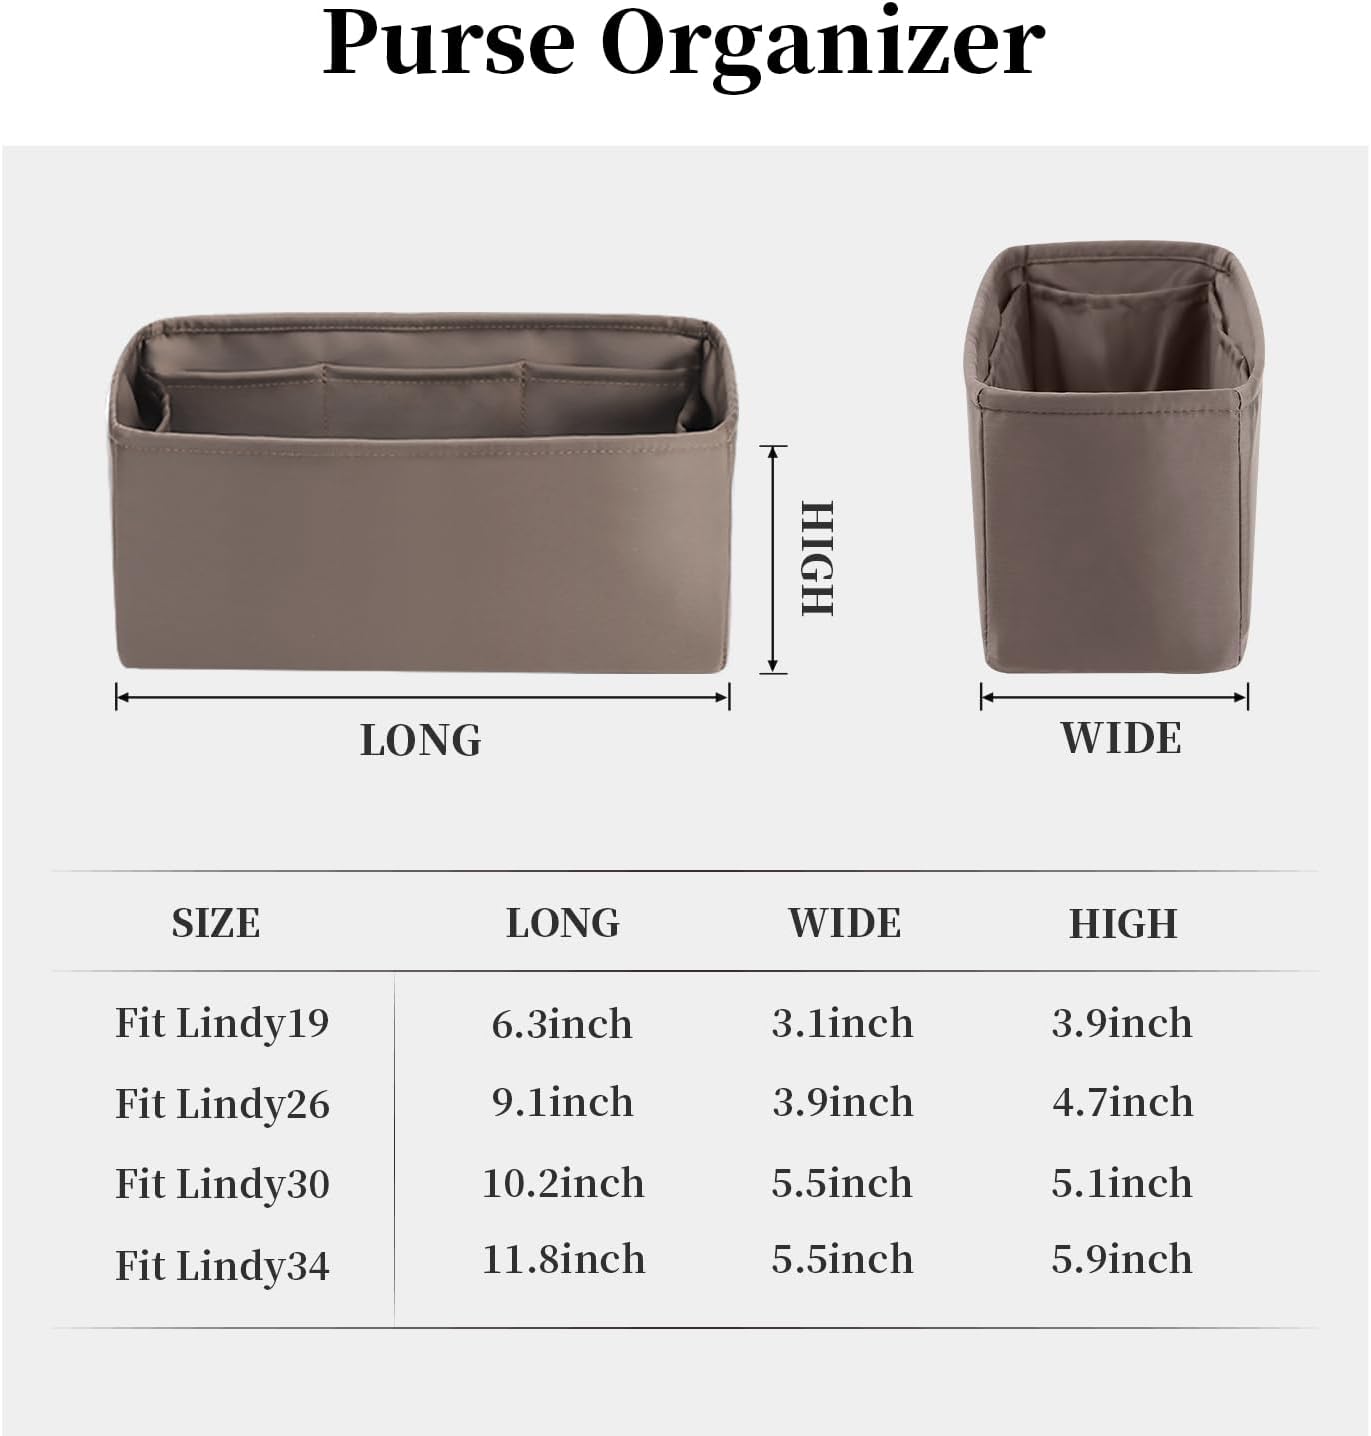 KINGS IN BAG Organizer Insert for Hermes Bags, Luxury Bags Storage with Silk, Fits Lindy 19/26 Bags, Lightweight Shaper for Daily Use, 8 Pockets Large Capacity(Black, Lindy26)